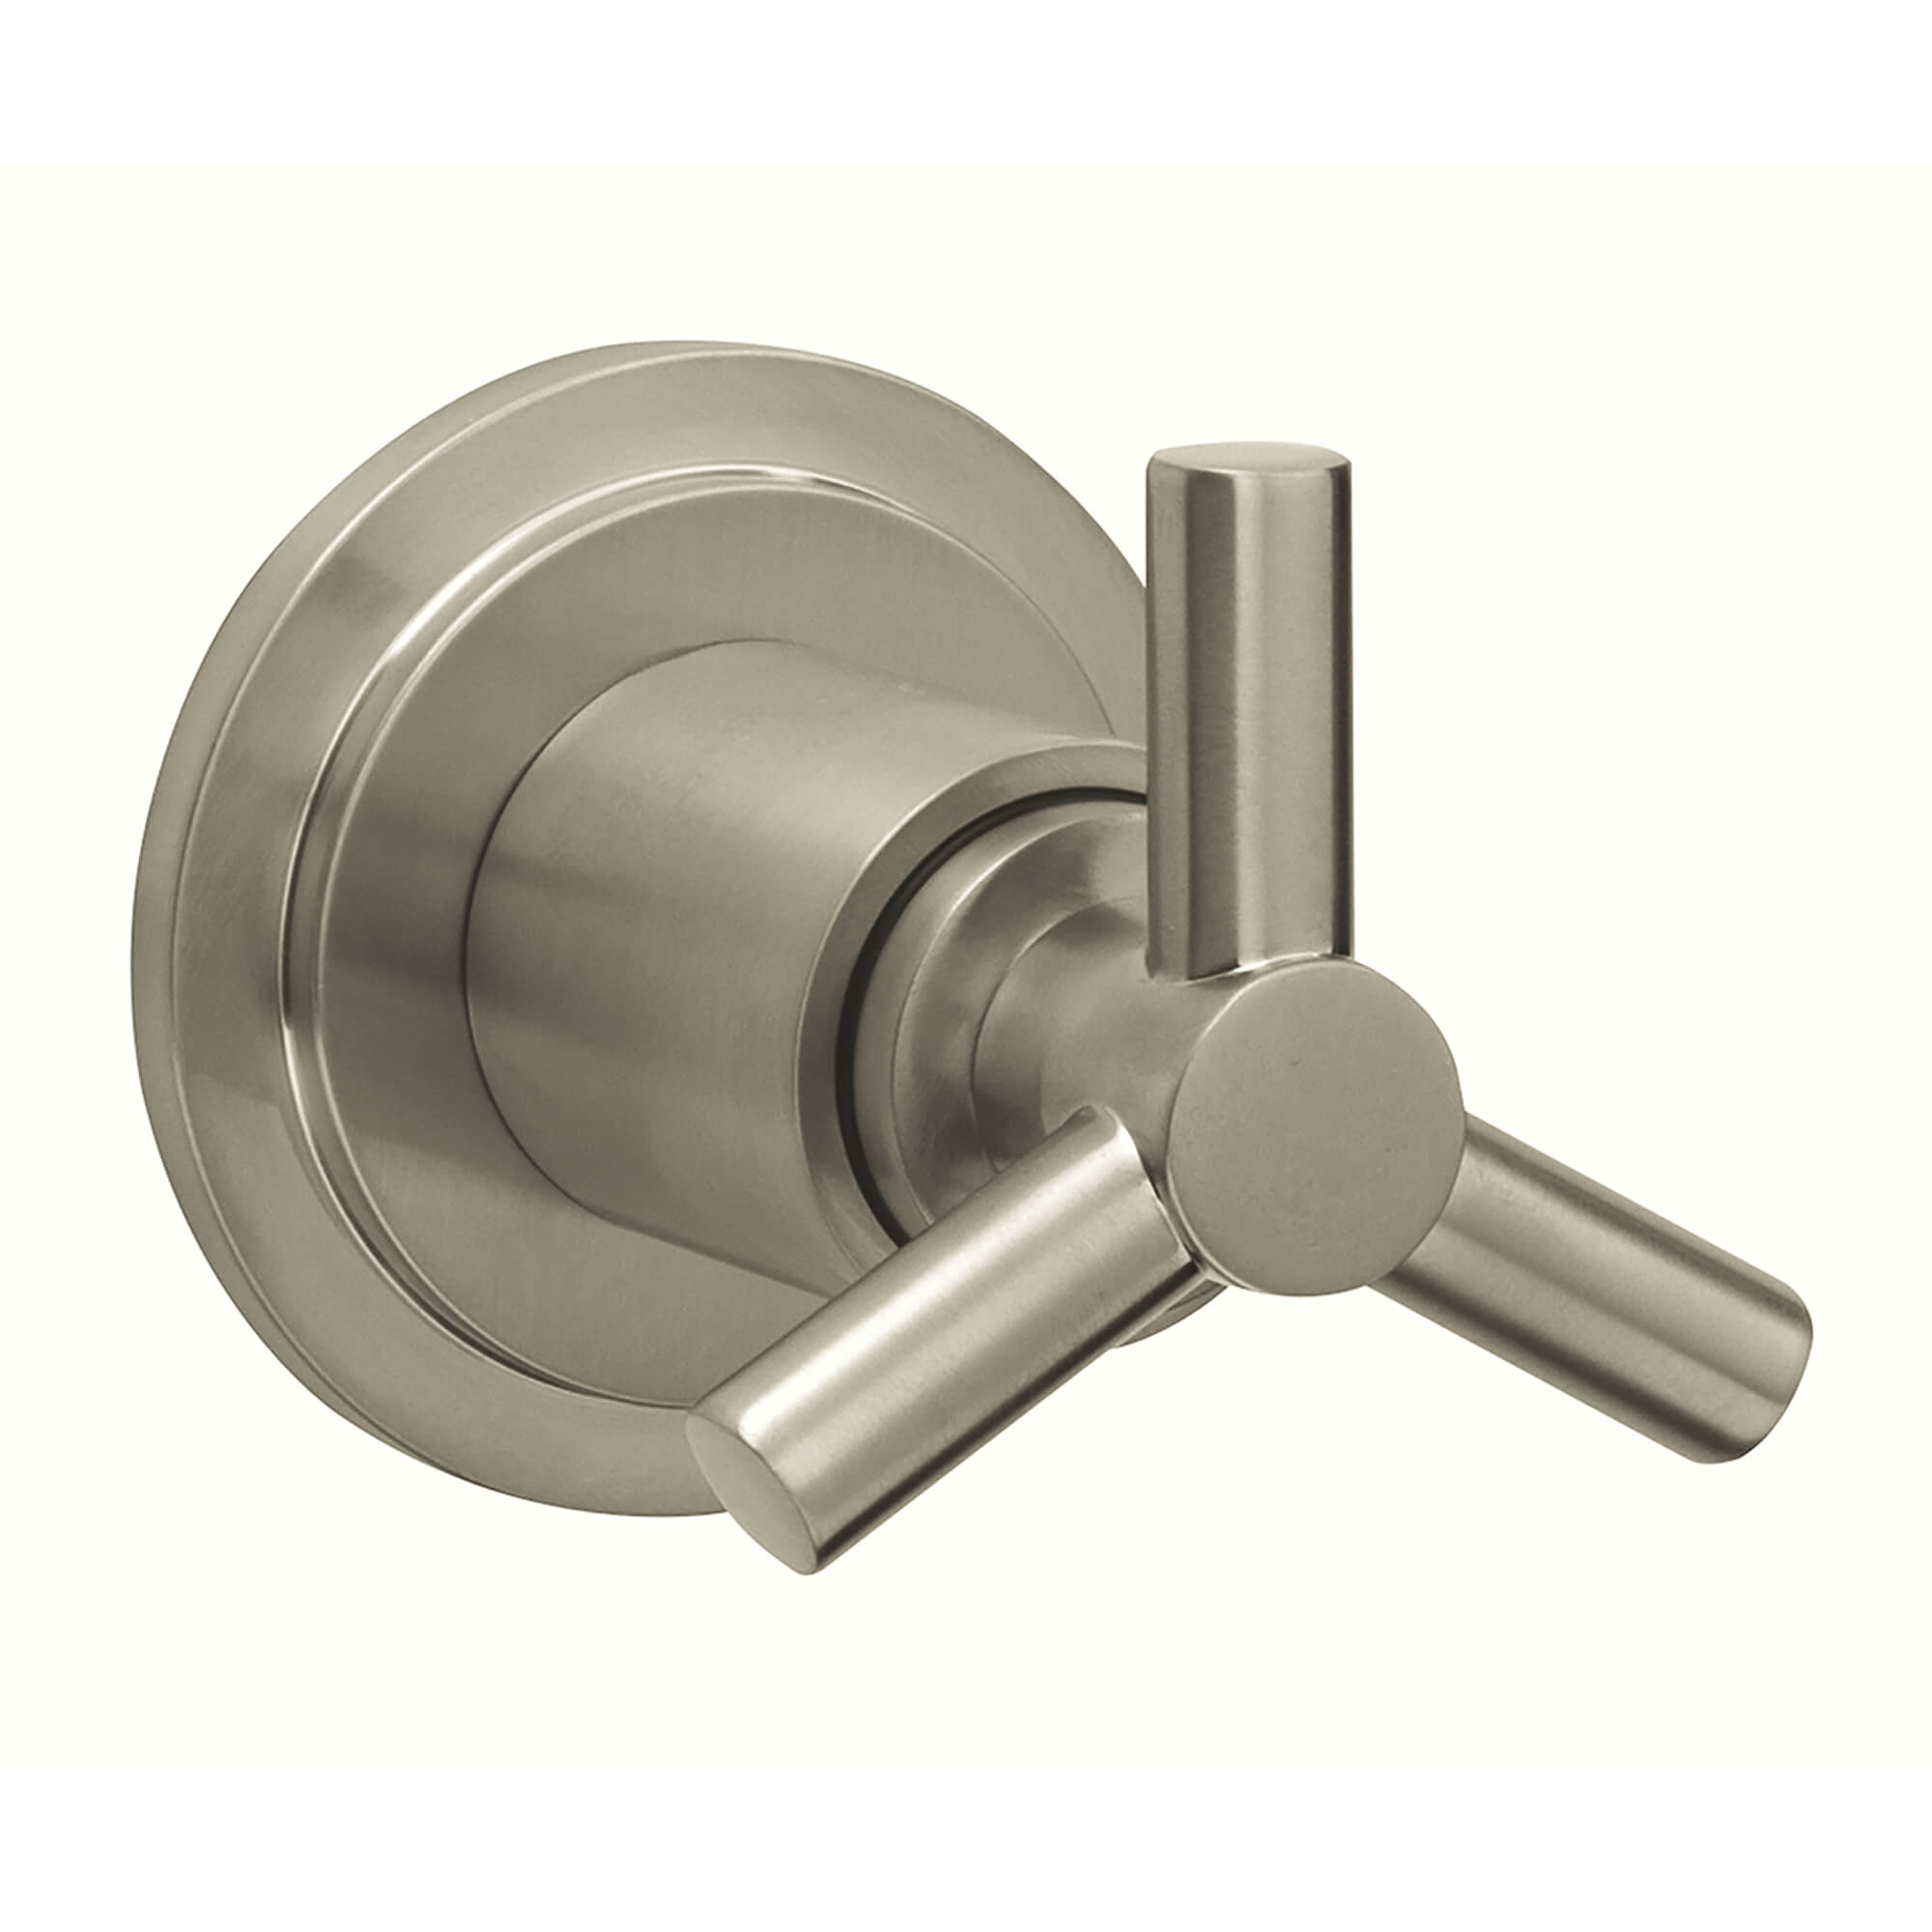 Volume Control Valve Trim with Lever Handle GROHE BRUSHED NICKEL